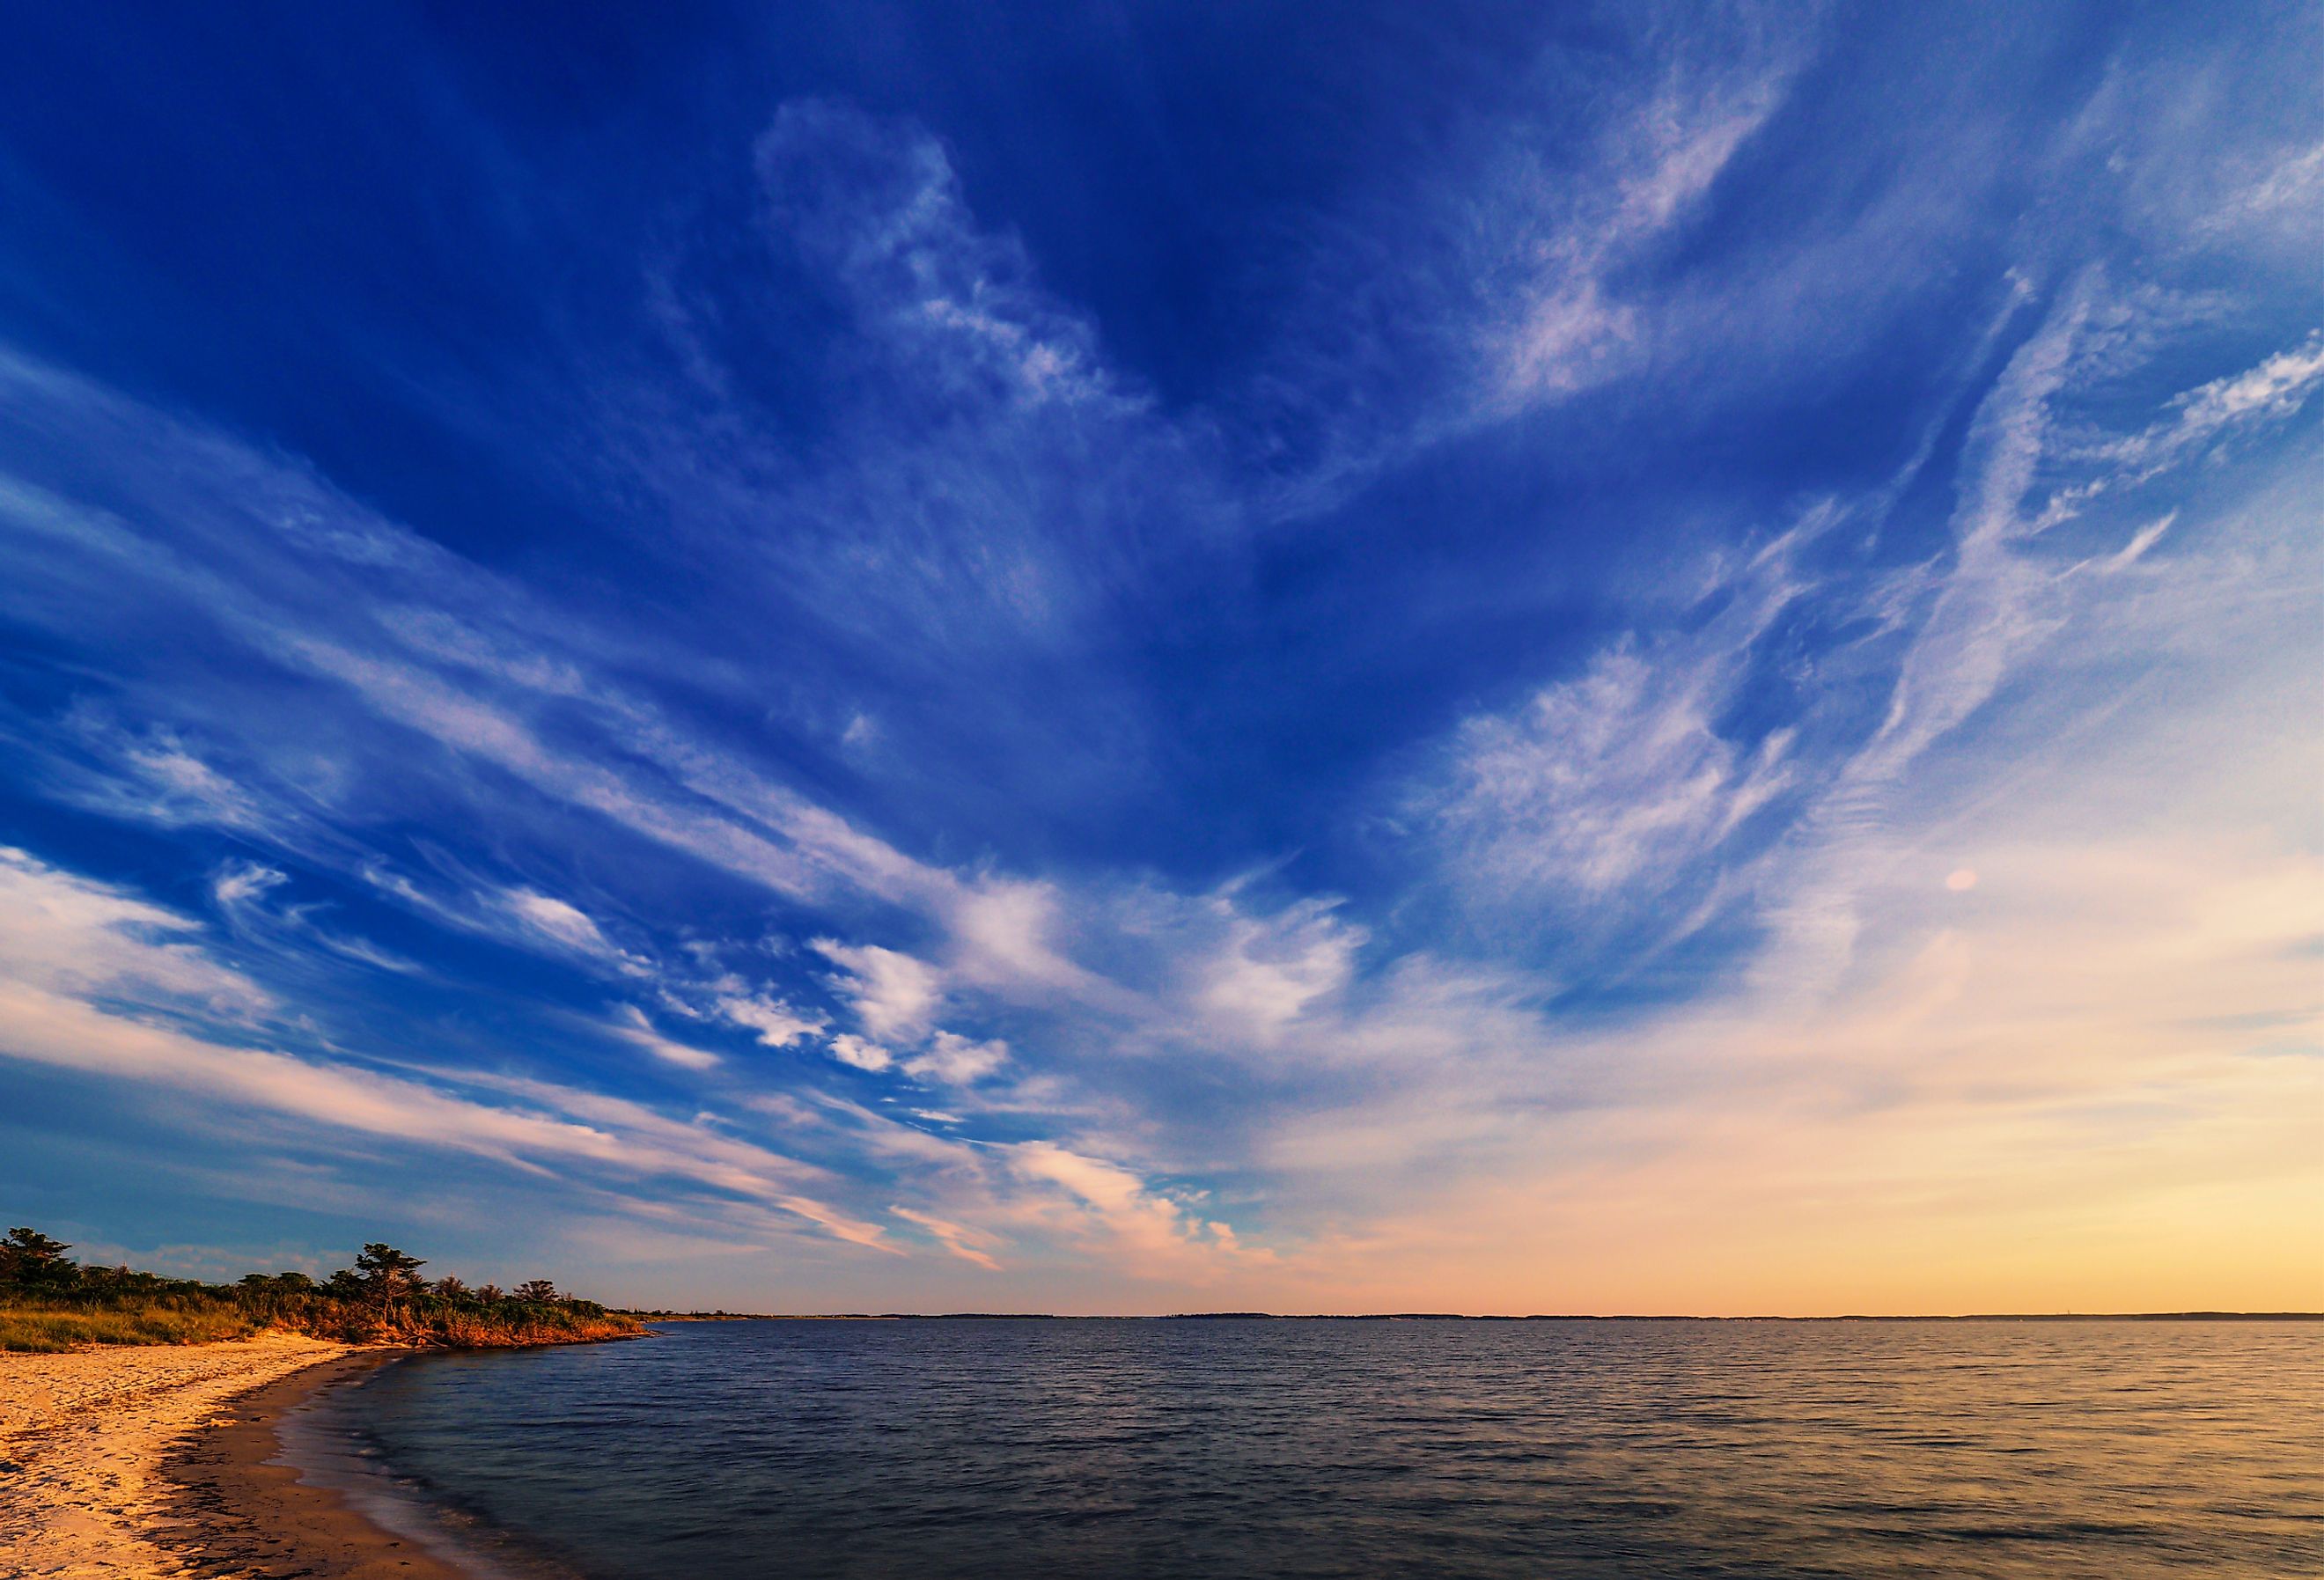 As twilight begins a dramatic sky unfolds before an empty beach at Rehoboth Bay, Delaware. Image credit David Kay via Shutterstock.